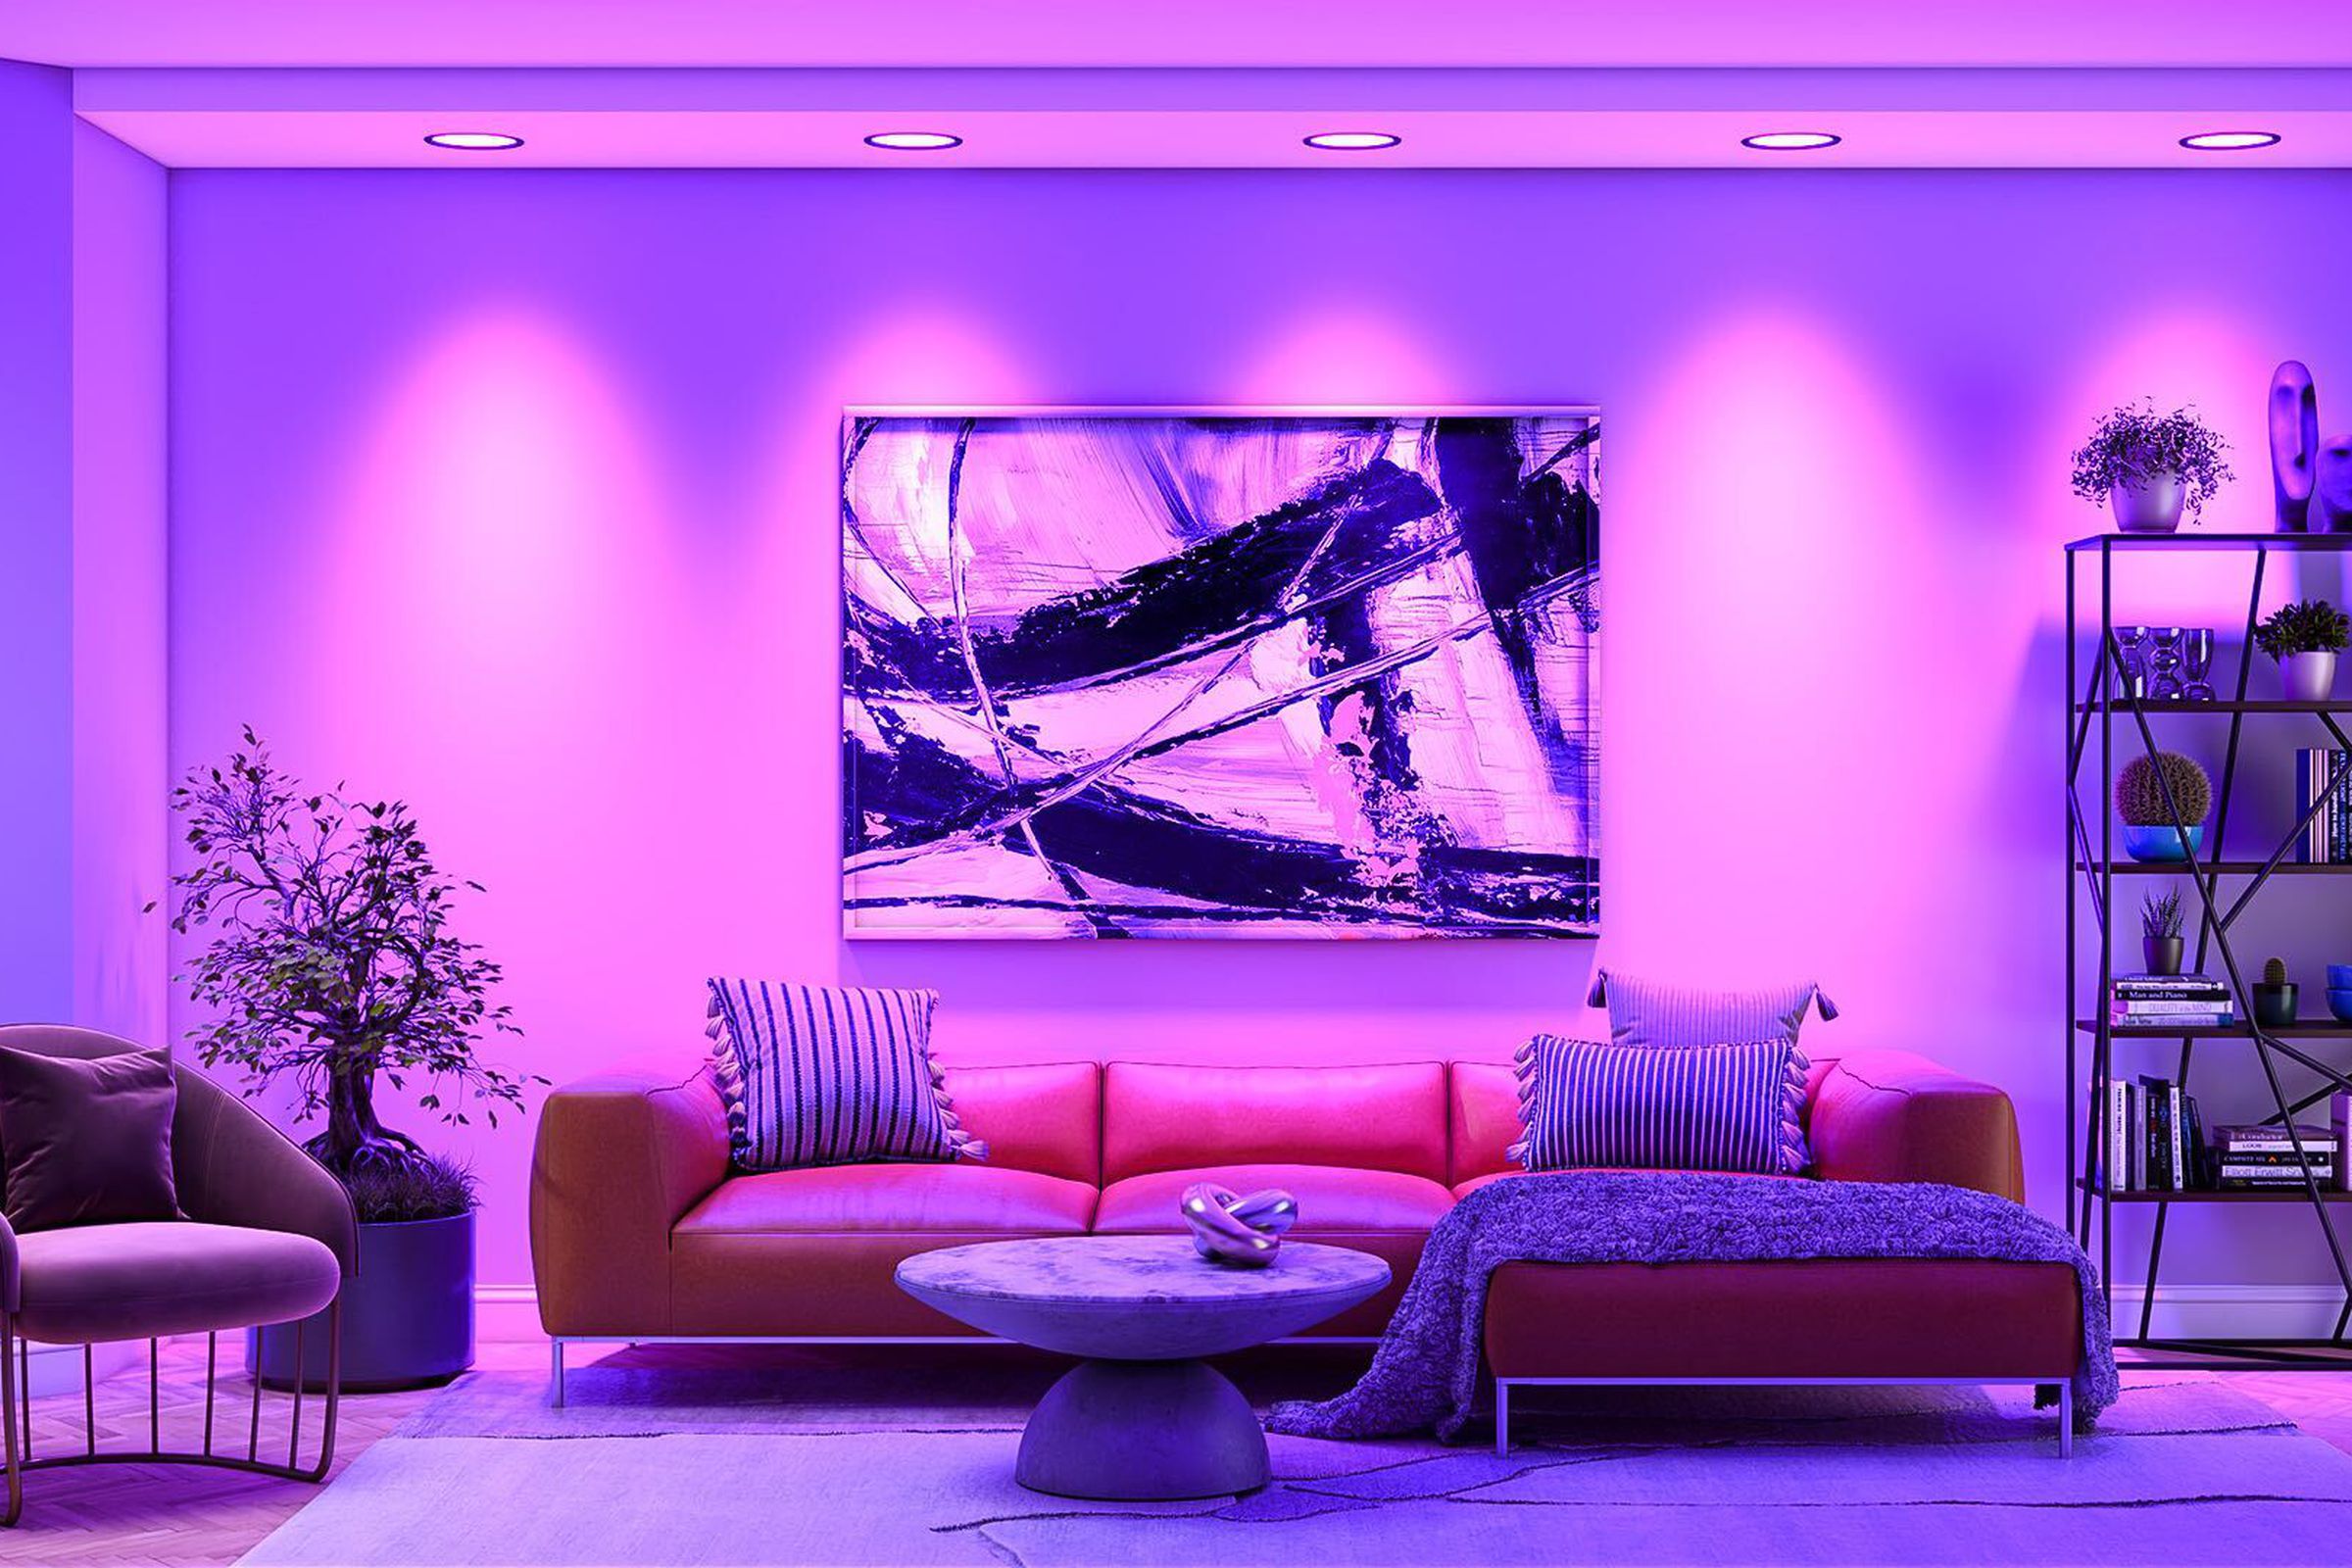 A living room with purple downlighting.